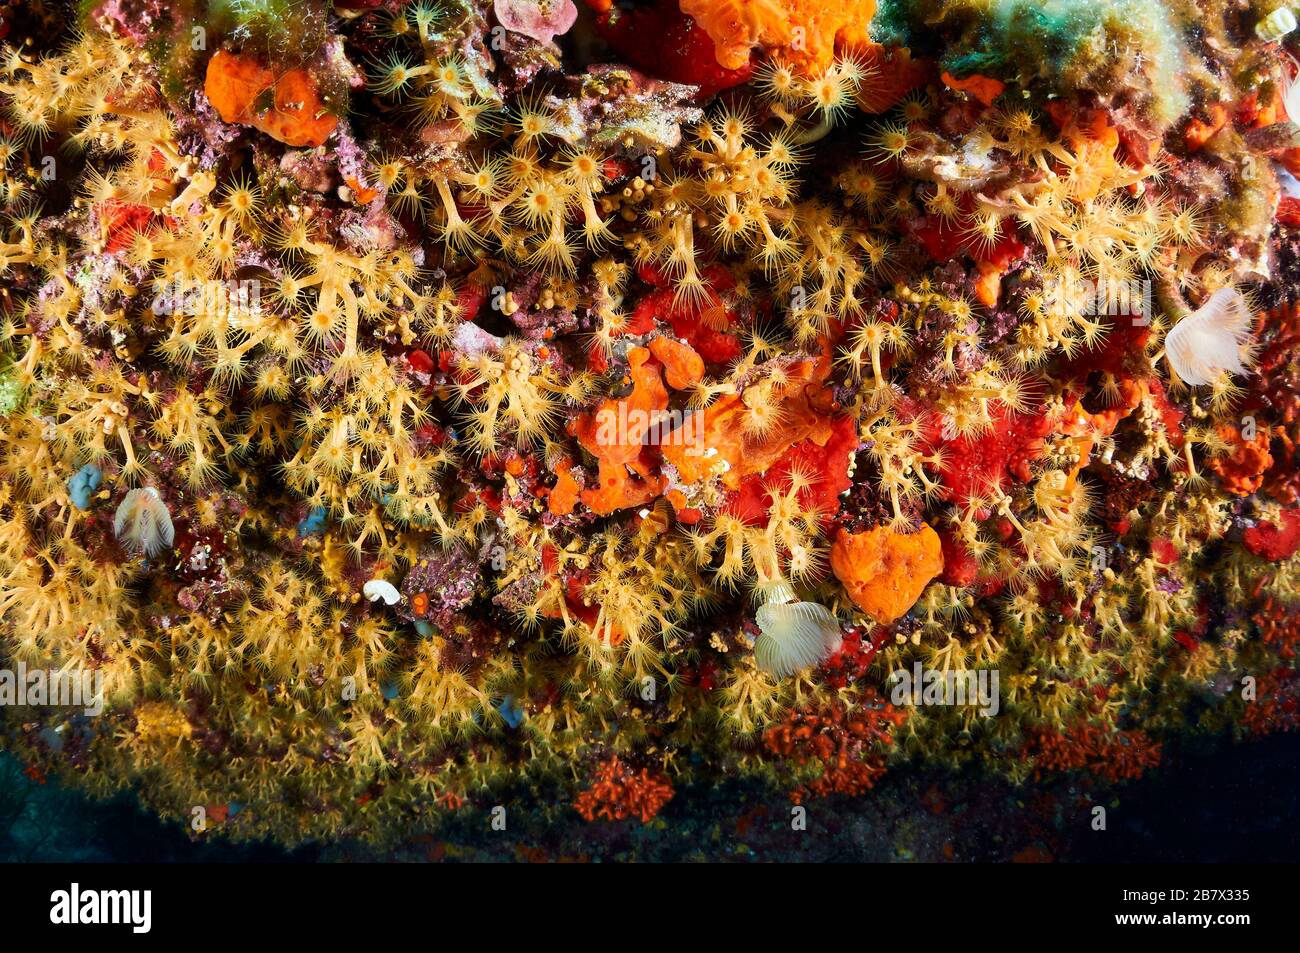 Yellow cluster anemone (Parazoanthus axinellae) colony and encrusting marine life in Ses Salines Natural Park (Formentera, Balearic Islands, Spain) Stock Photo